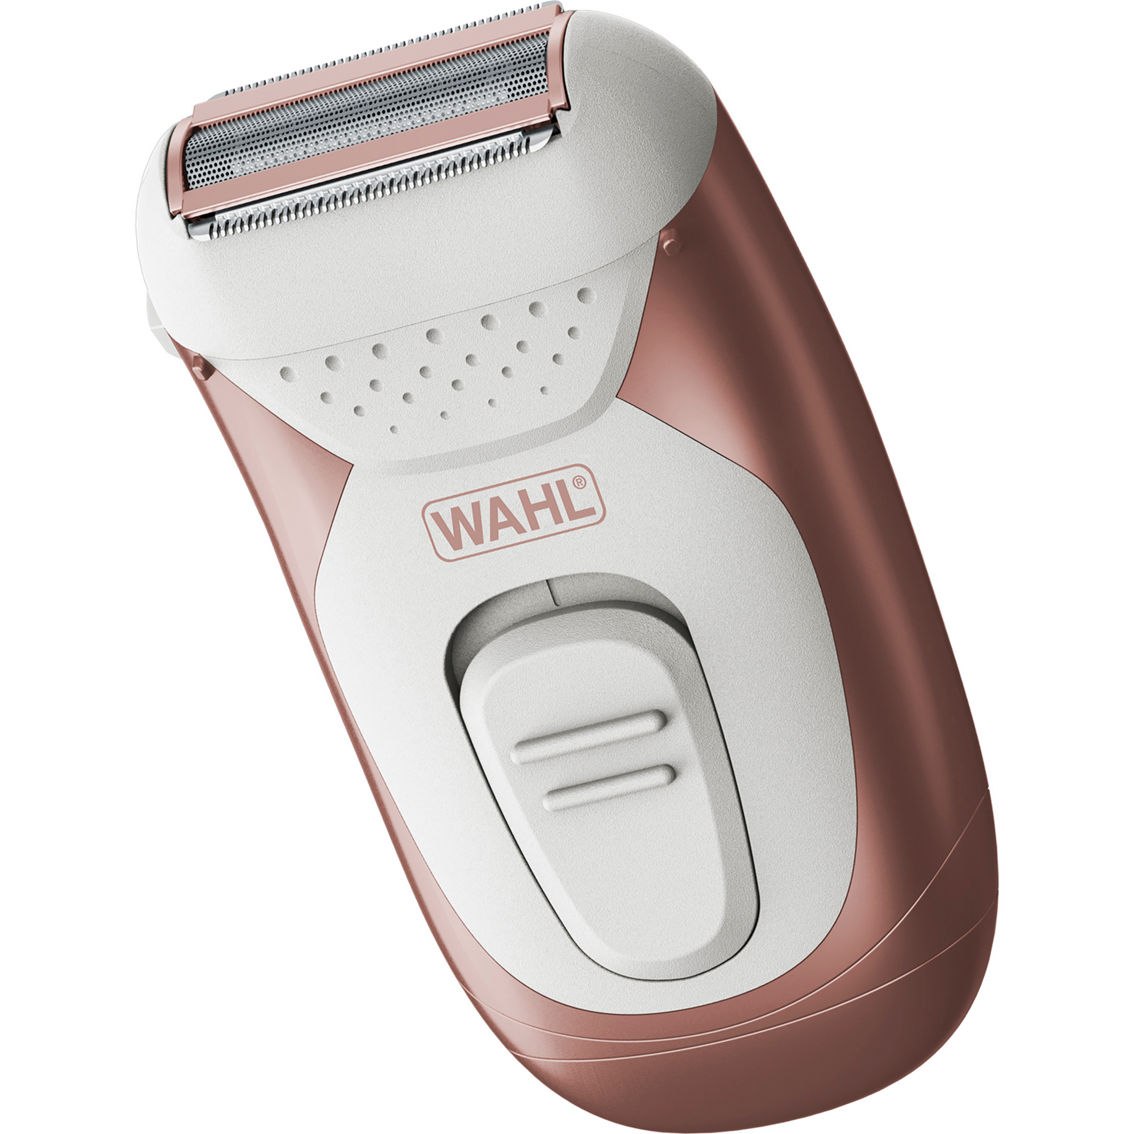 Wahl Smooth Confidence Shaver - Image 3 of 3